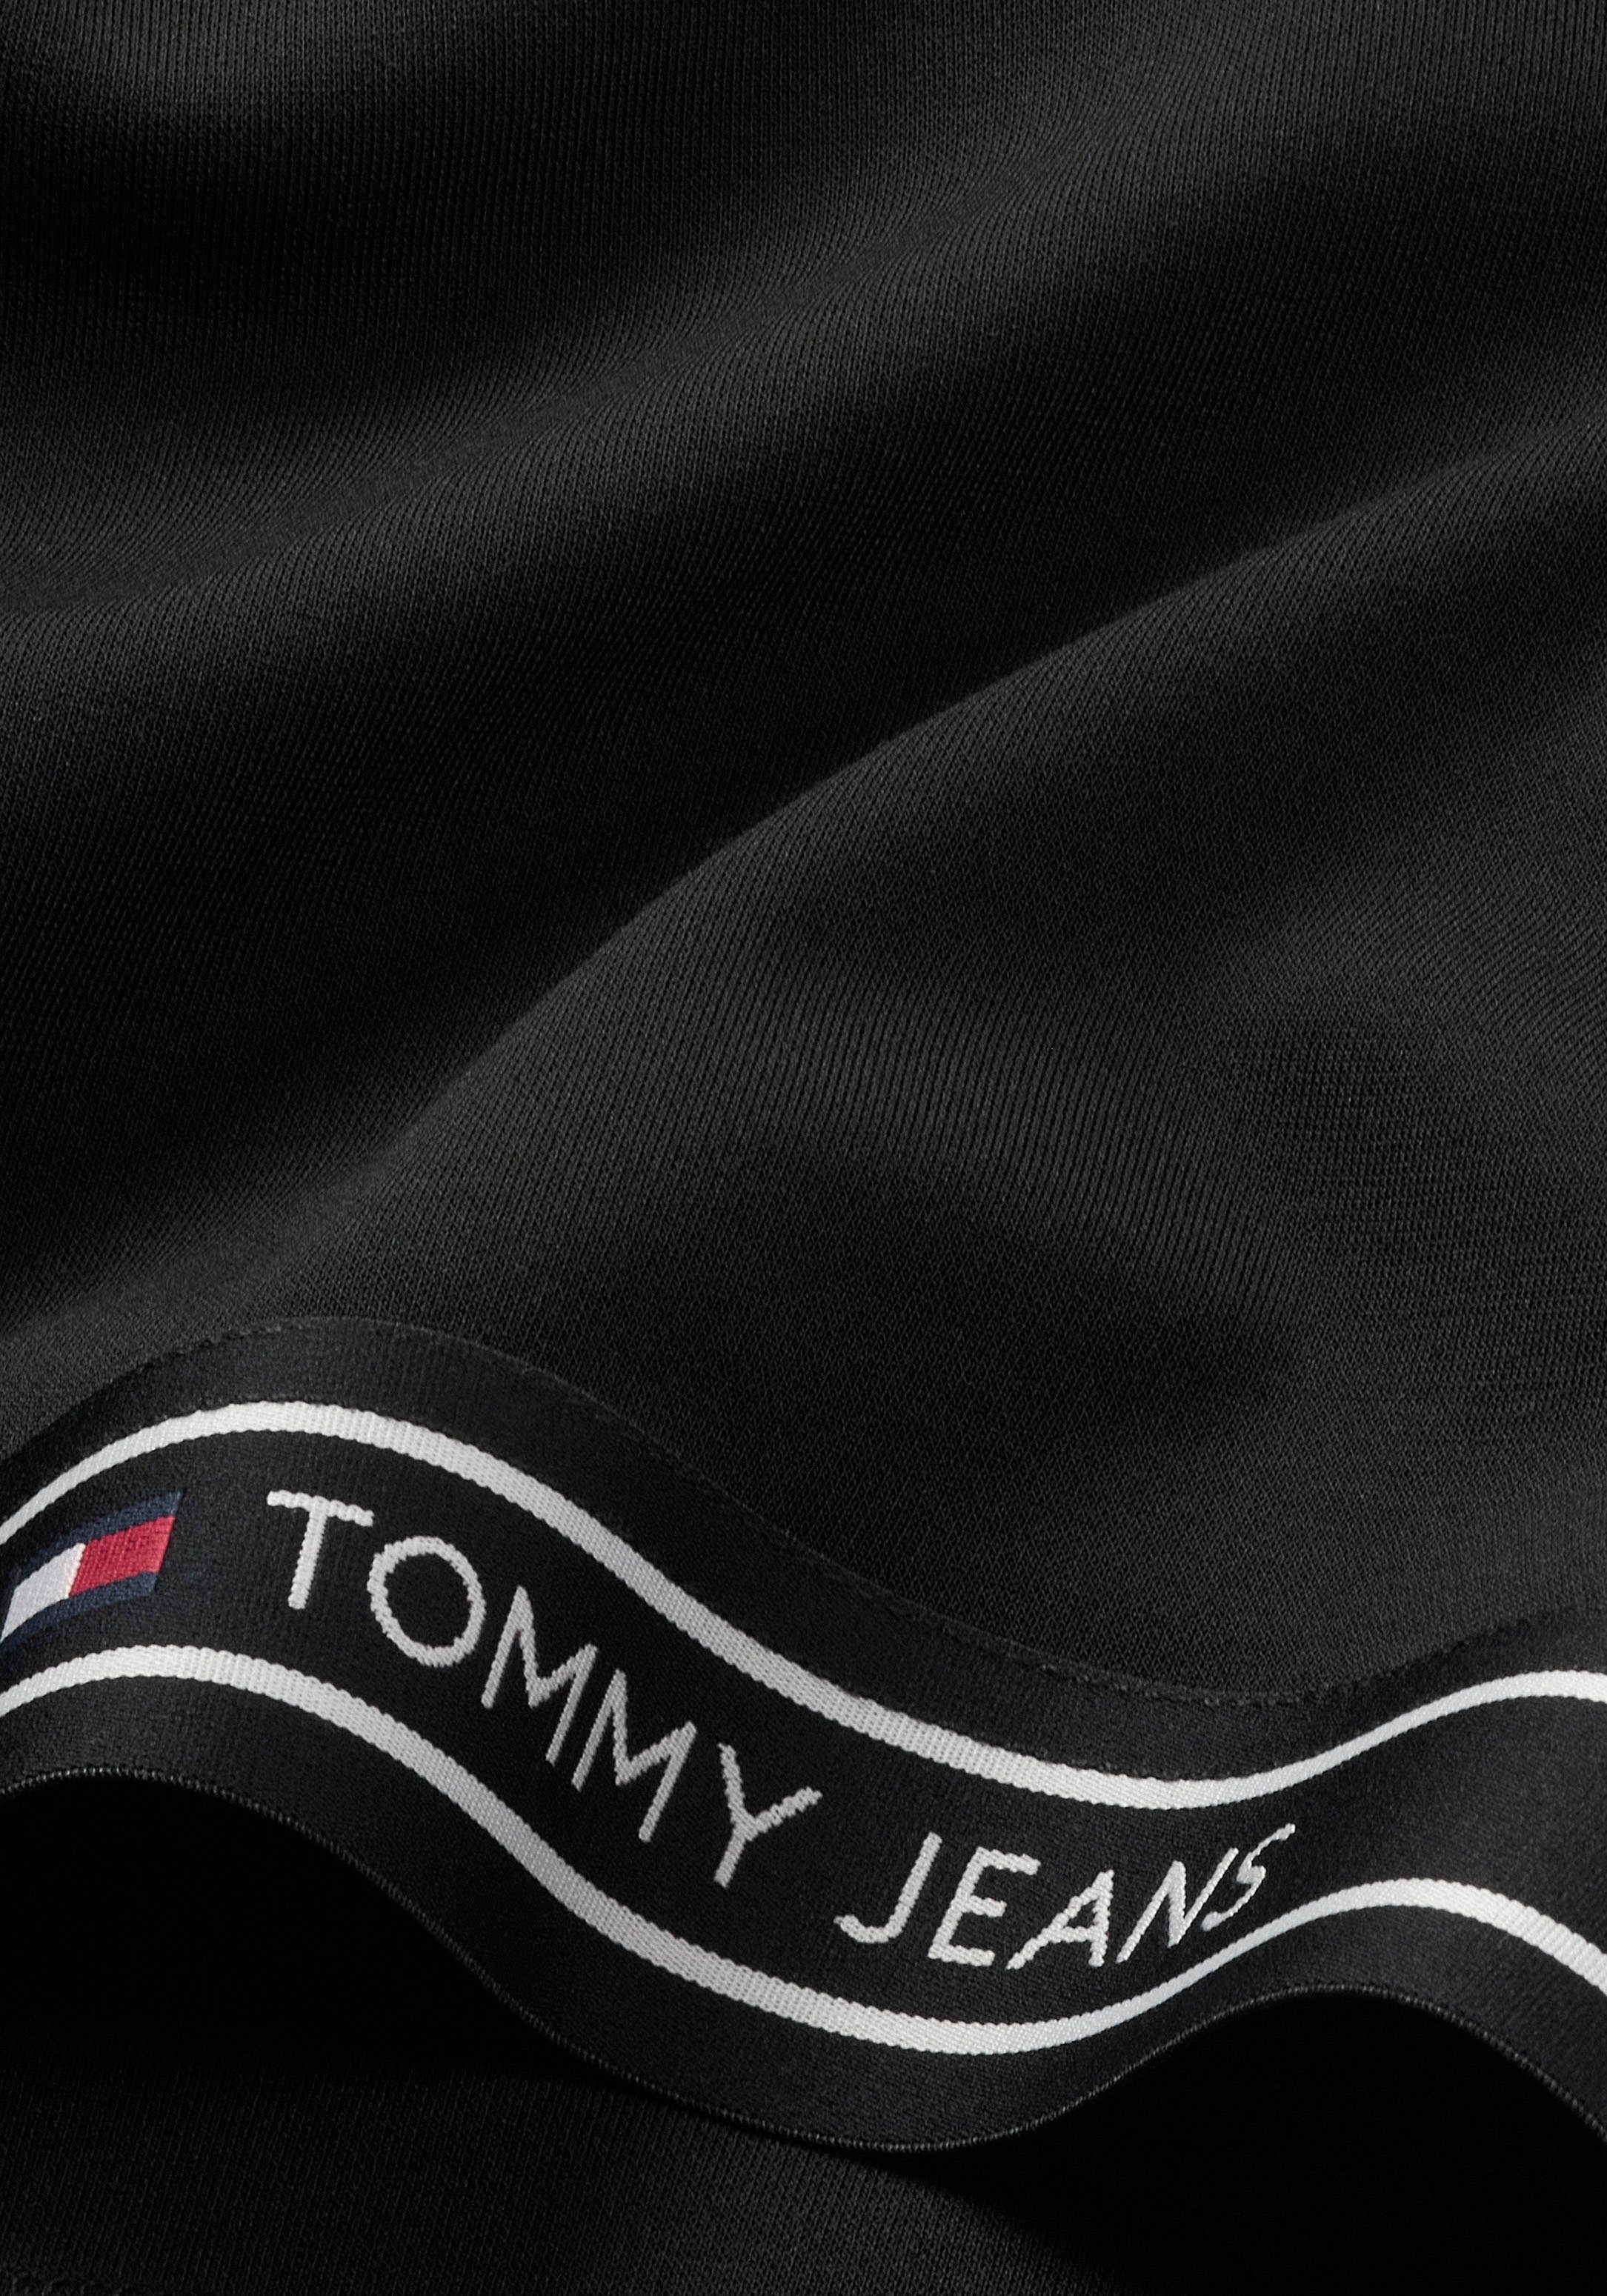 Logoprägung TJW CUT Langarmshirt CRP EXT LS TAPING mit OUT Jeans Tommy